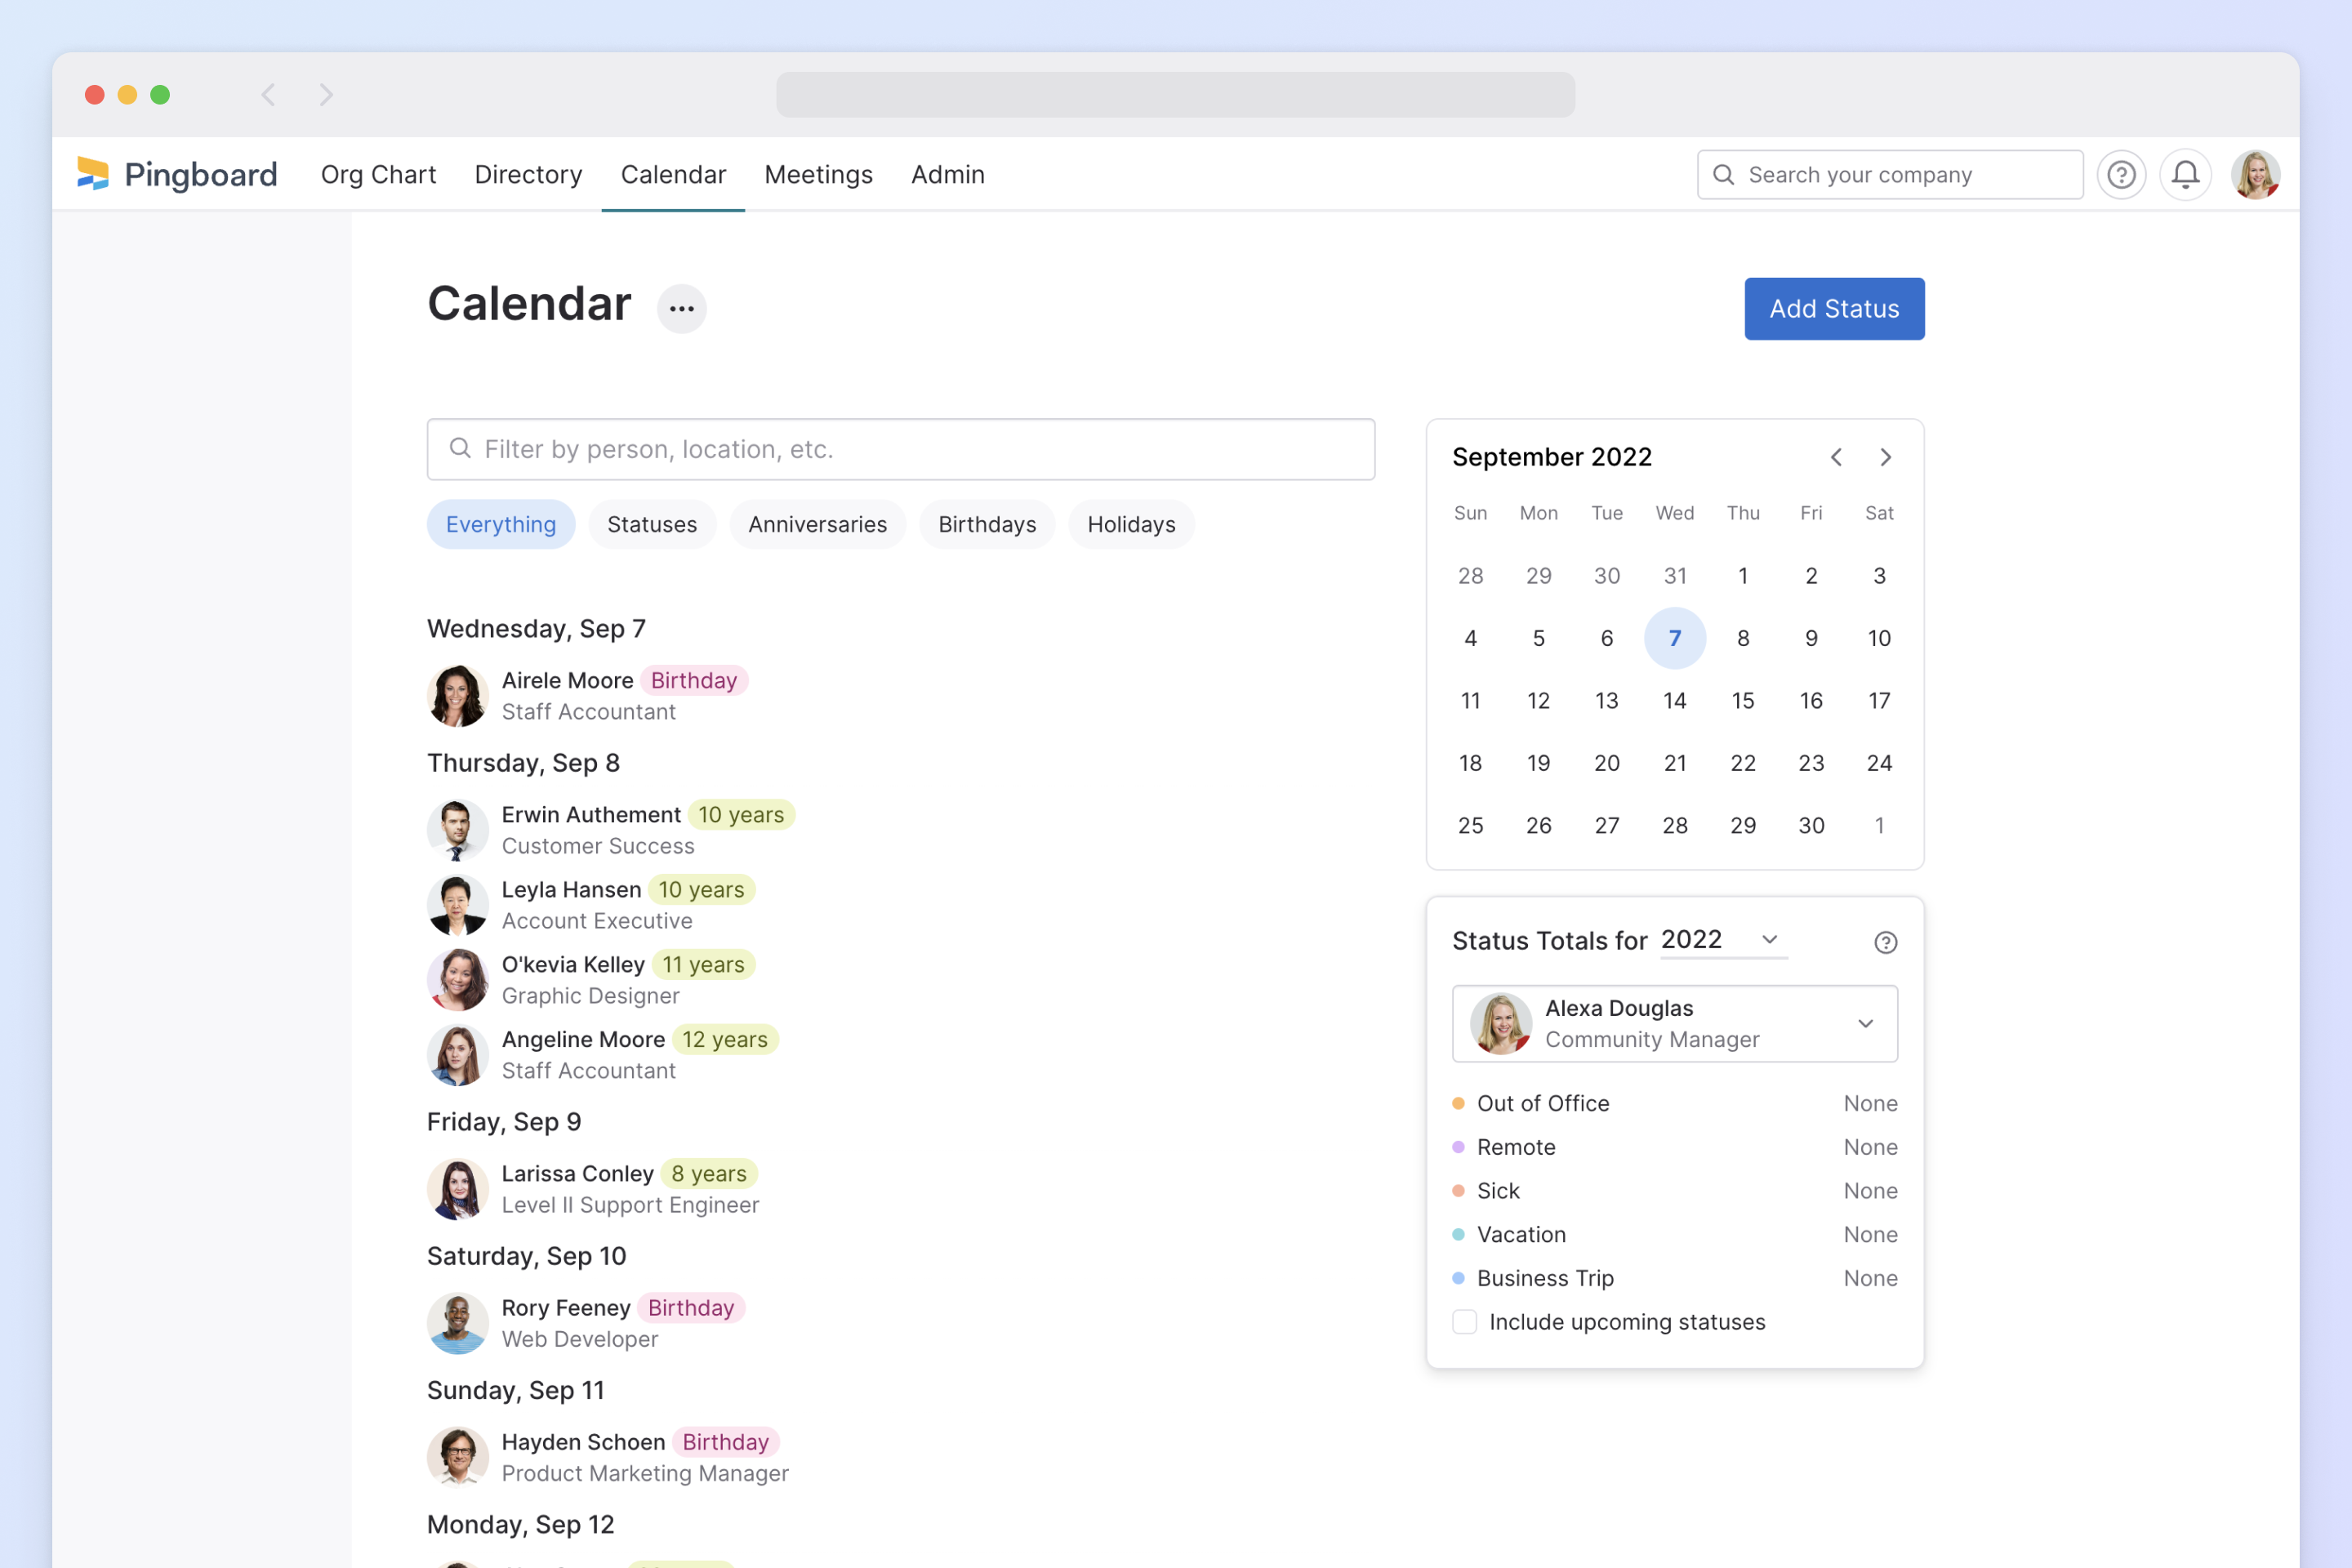 Pingboard Software - Customizable team calendar to fit your company culture